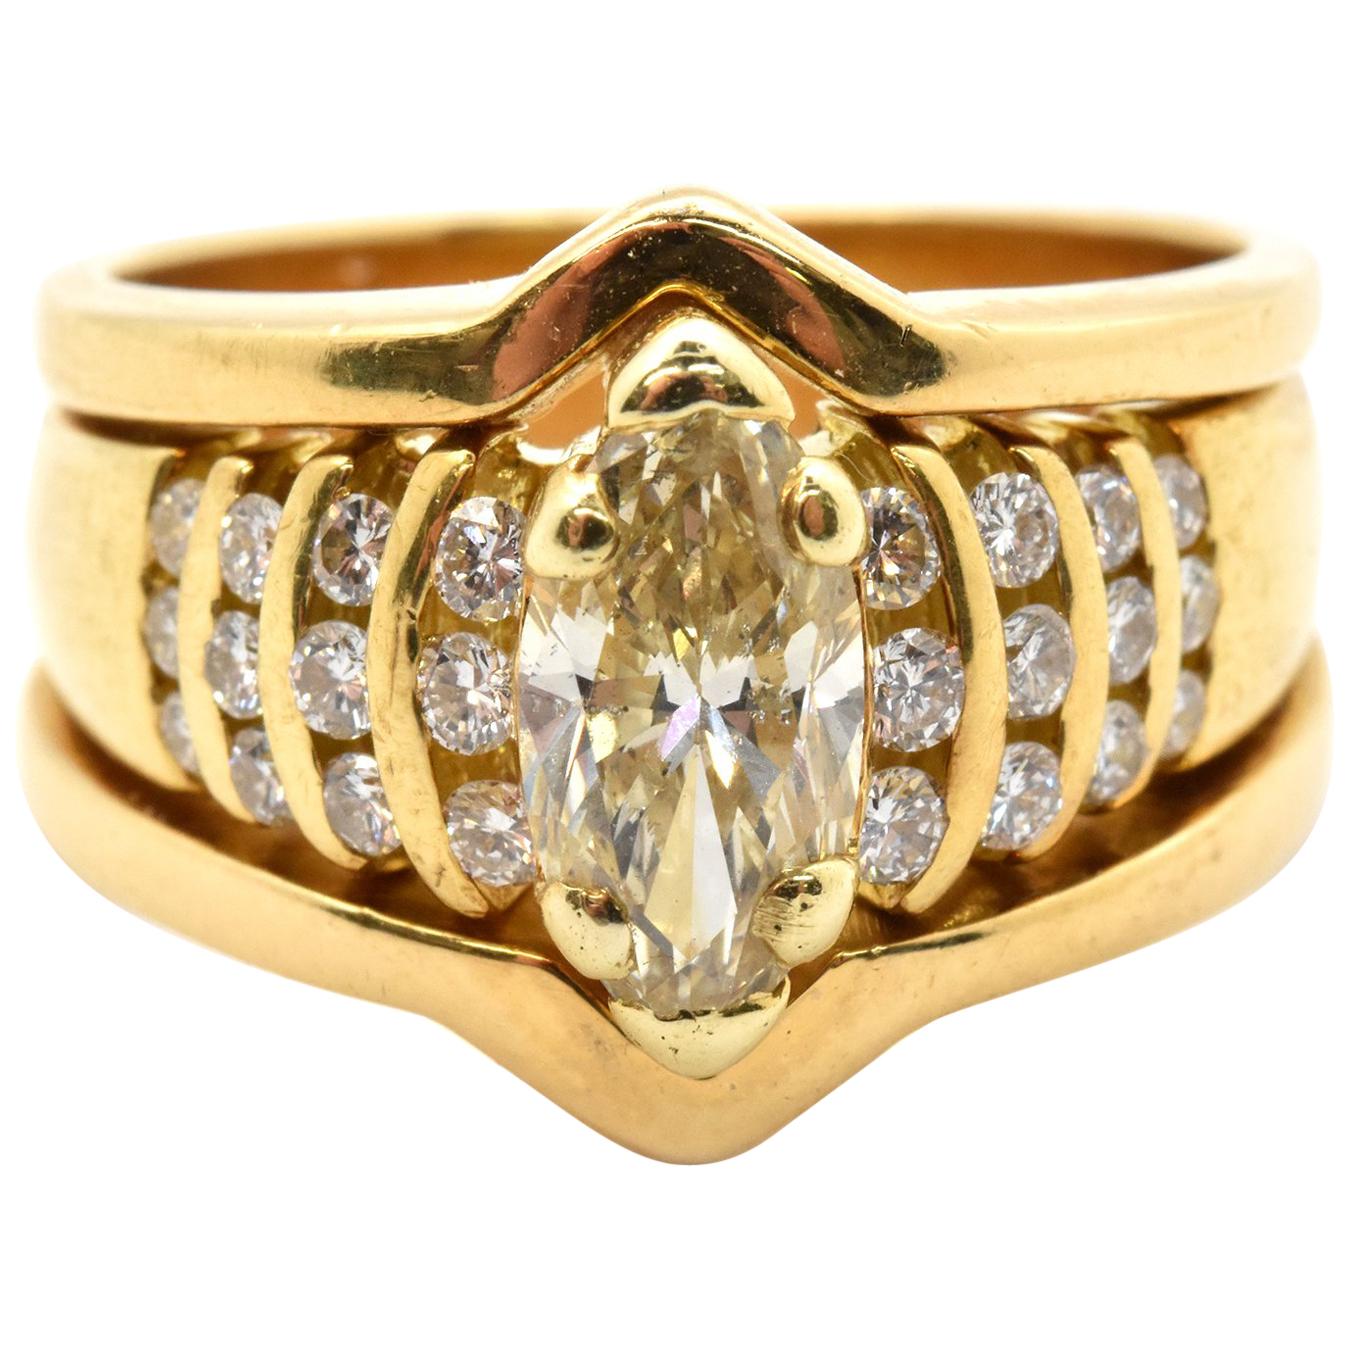 18 Karat Yellow Gold and 1.10 Carat Marquise Diamond Ring with Accents